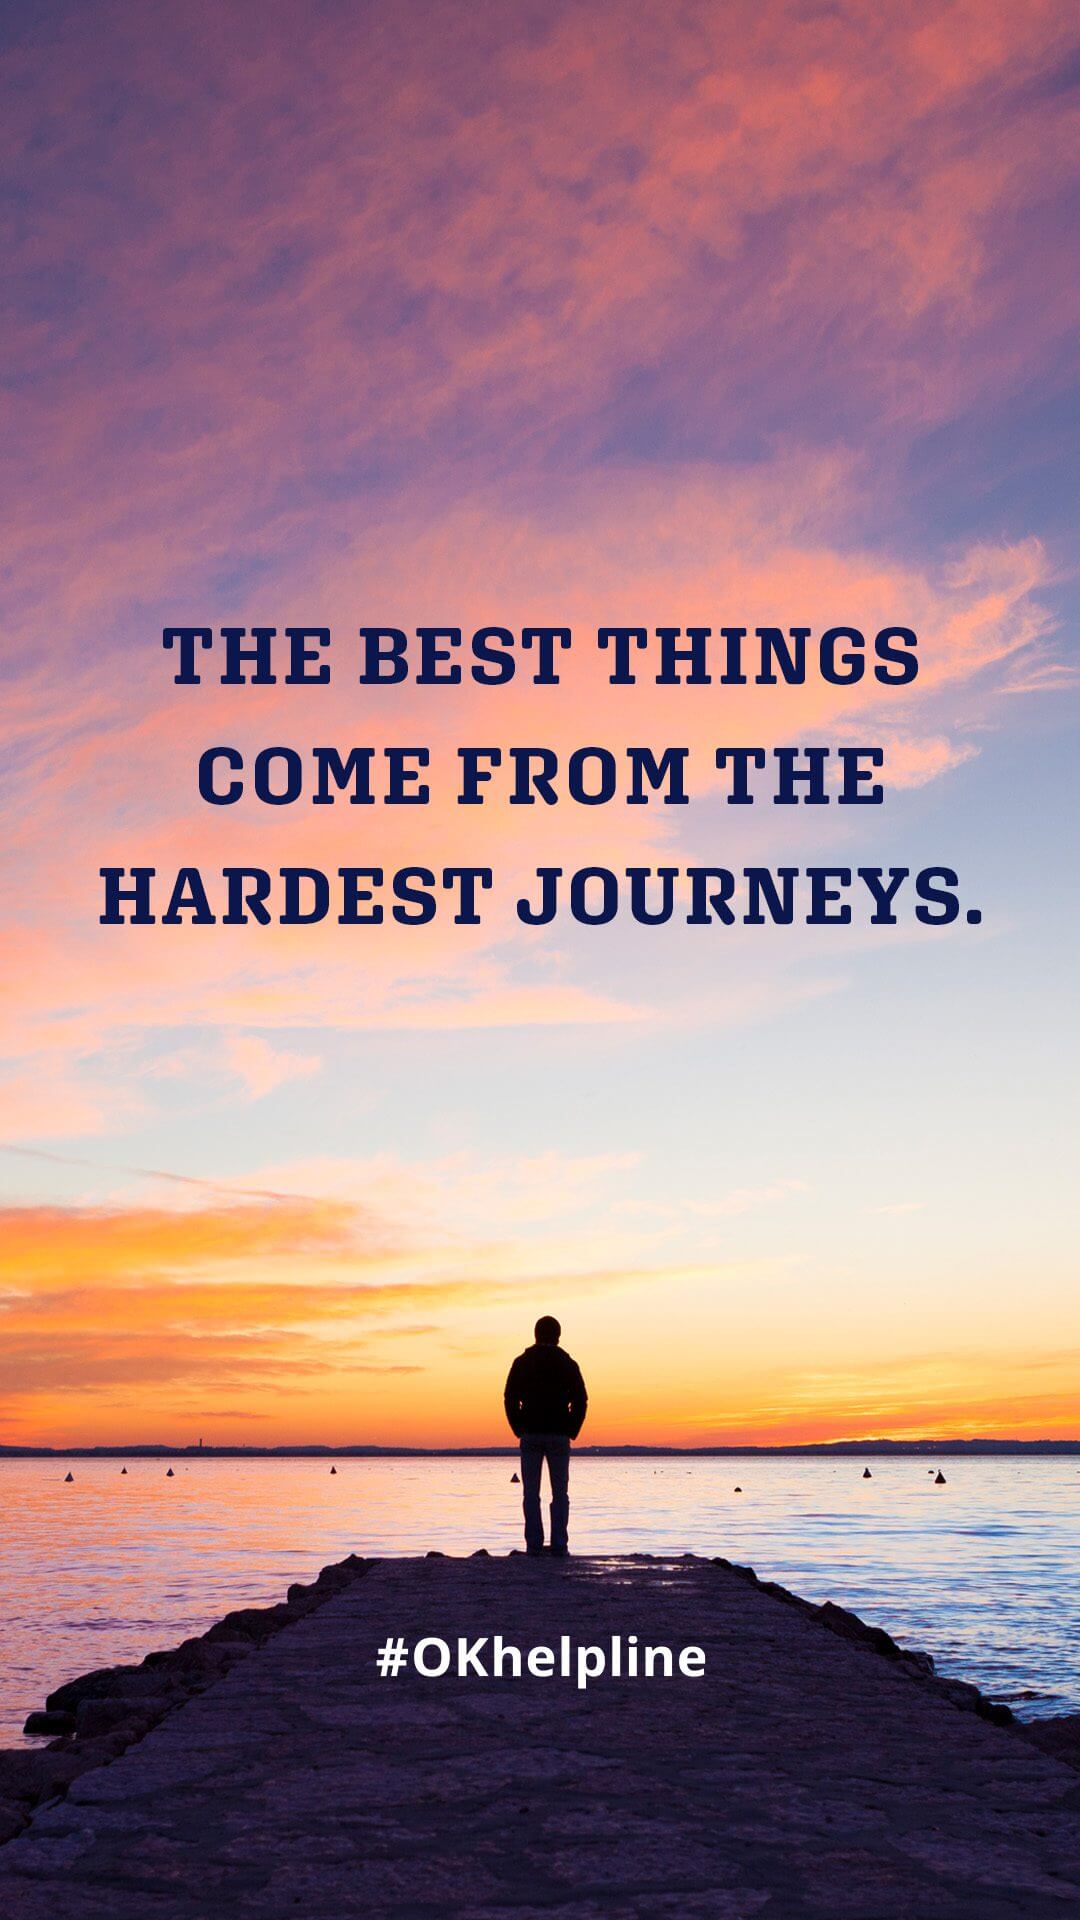 The best things come from the hardest journeys